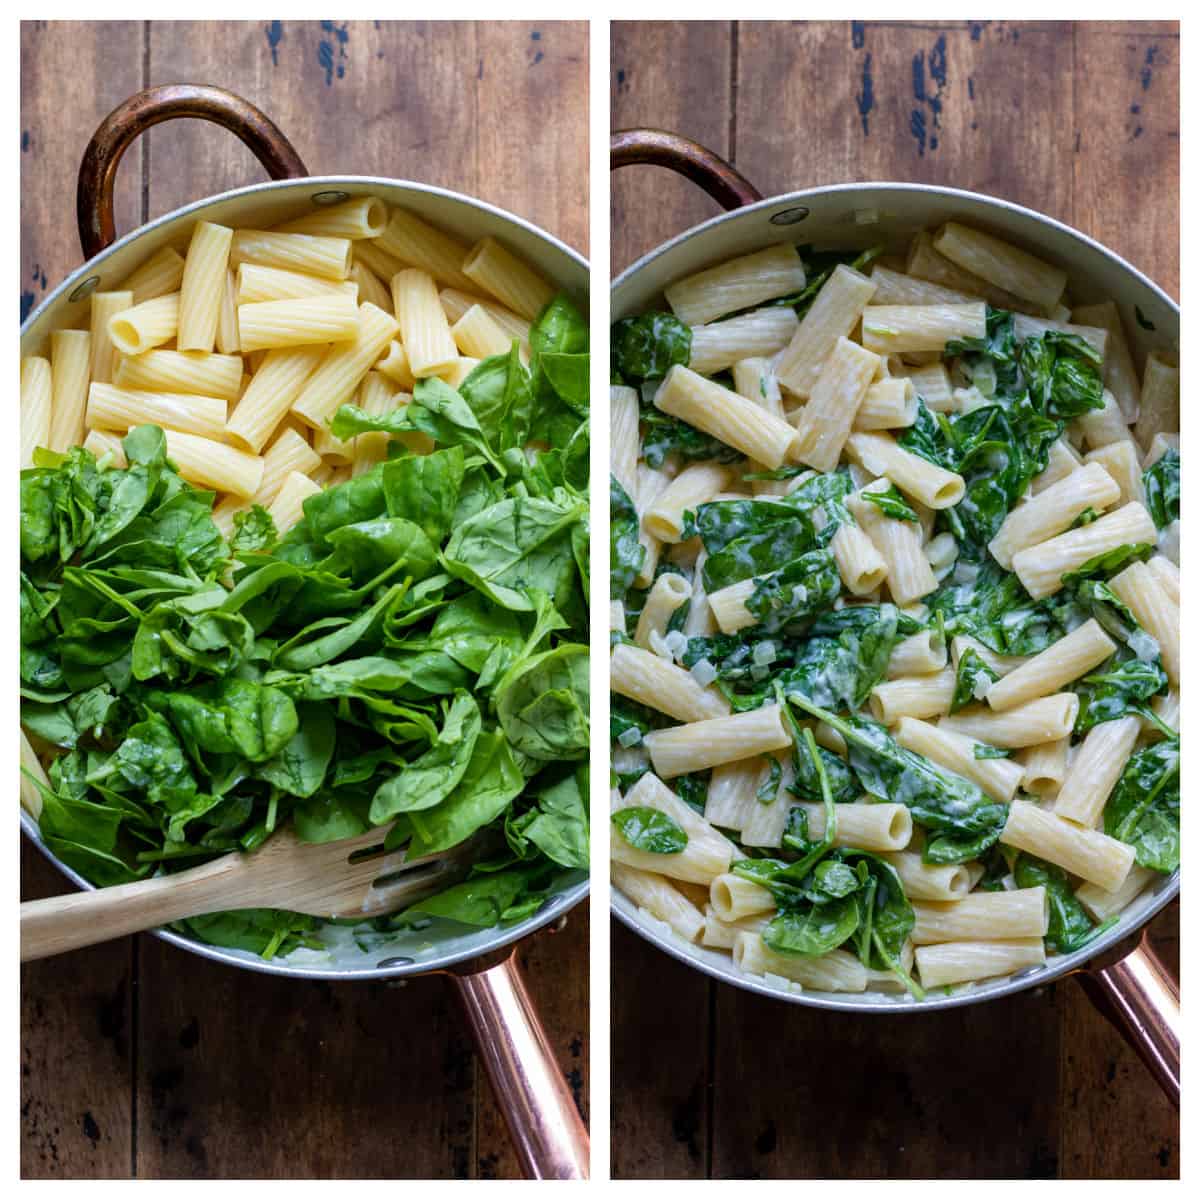 Adding spinach and pasta to the pot.